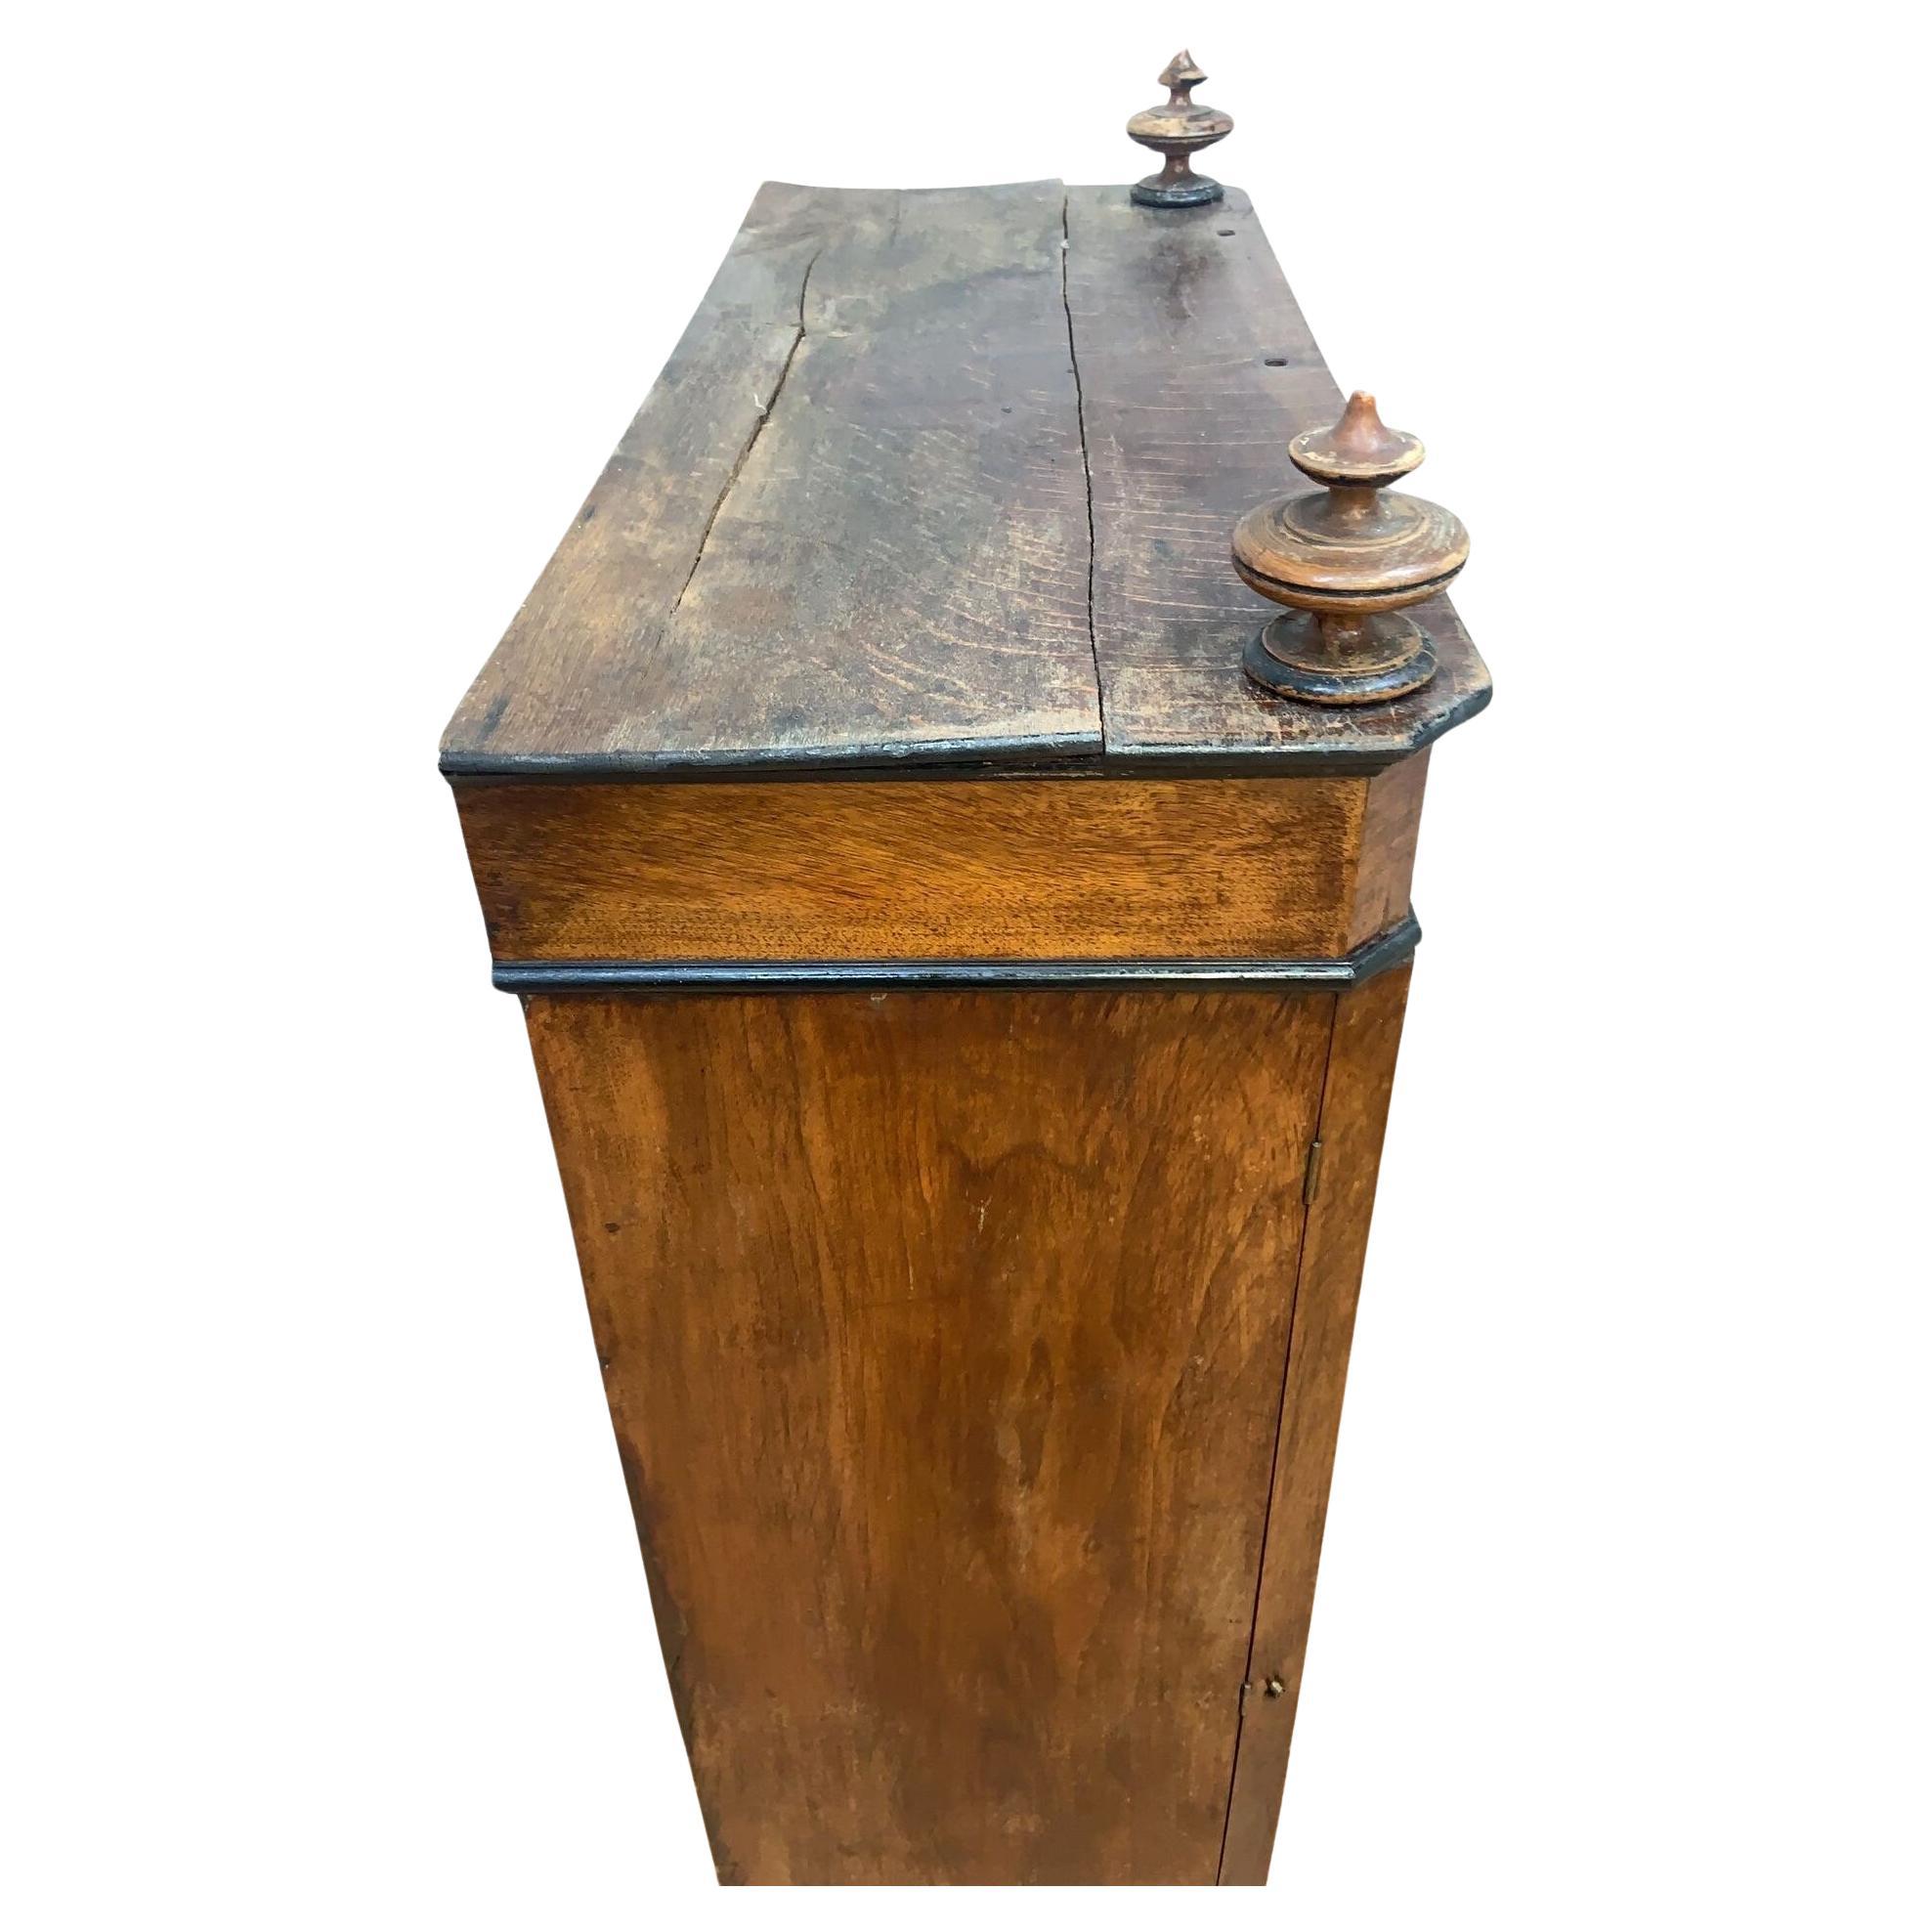 Antique French Napoleon Locking-Side 13 Drawers File Chest Cabinet

Our exceptional French Napoleon Lock-Side File Chest boasts an impressive array of 13 drawers. Crafted with meticulous attention to detail, this chest is not just a storage solution